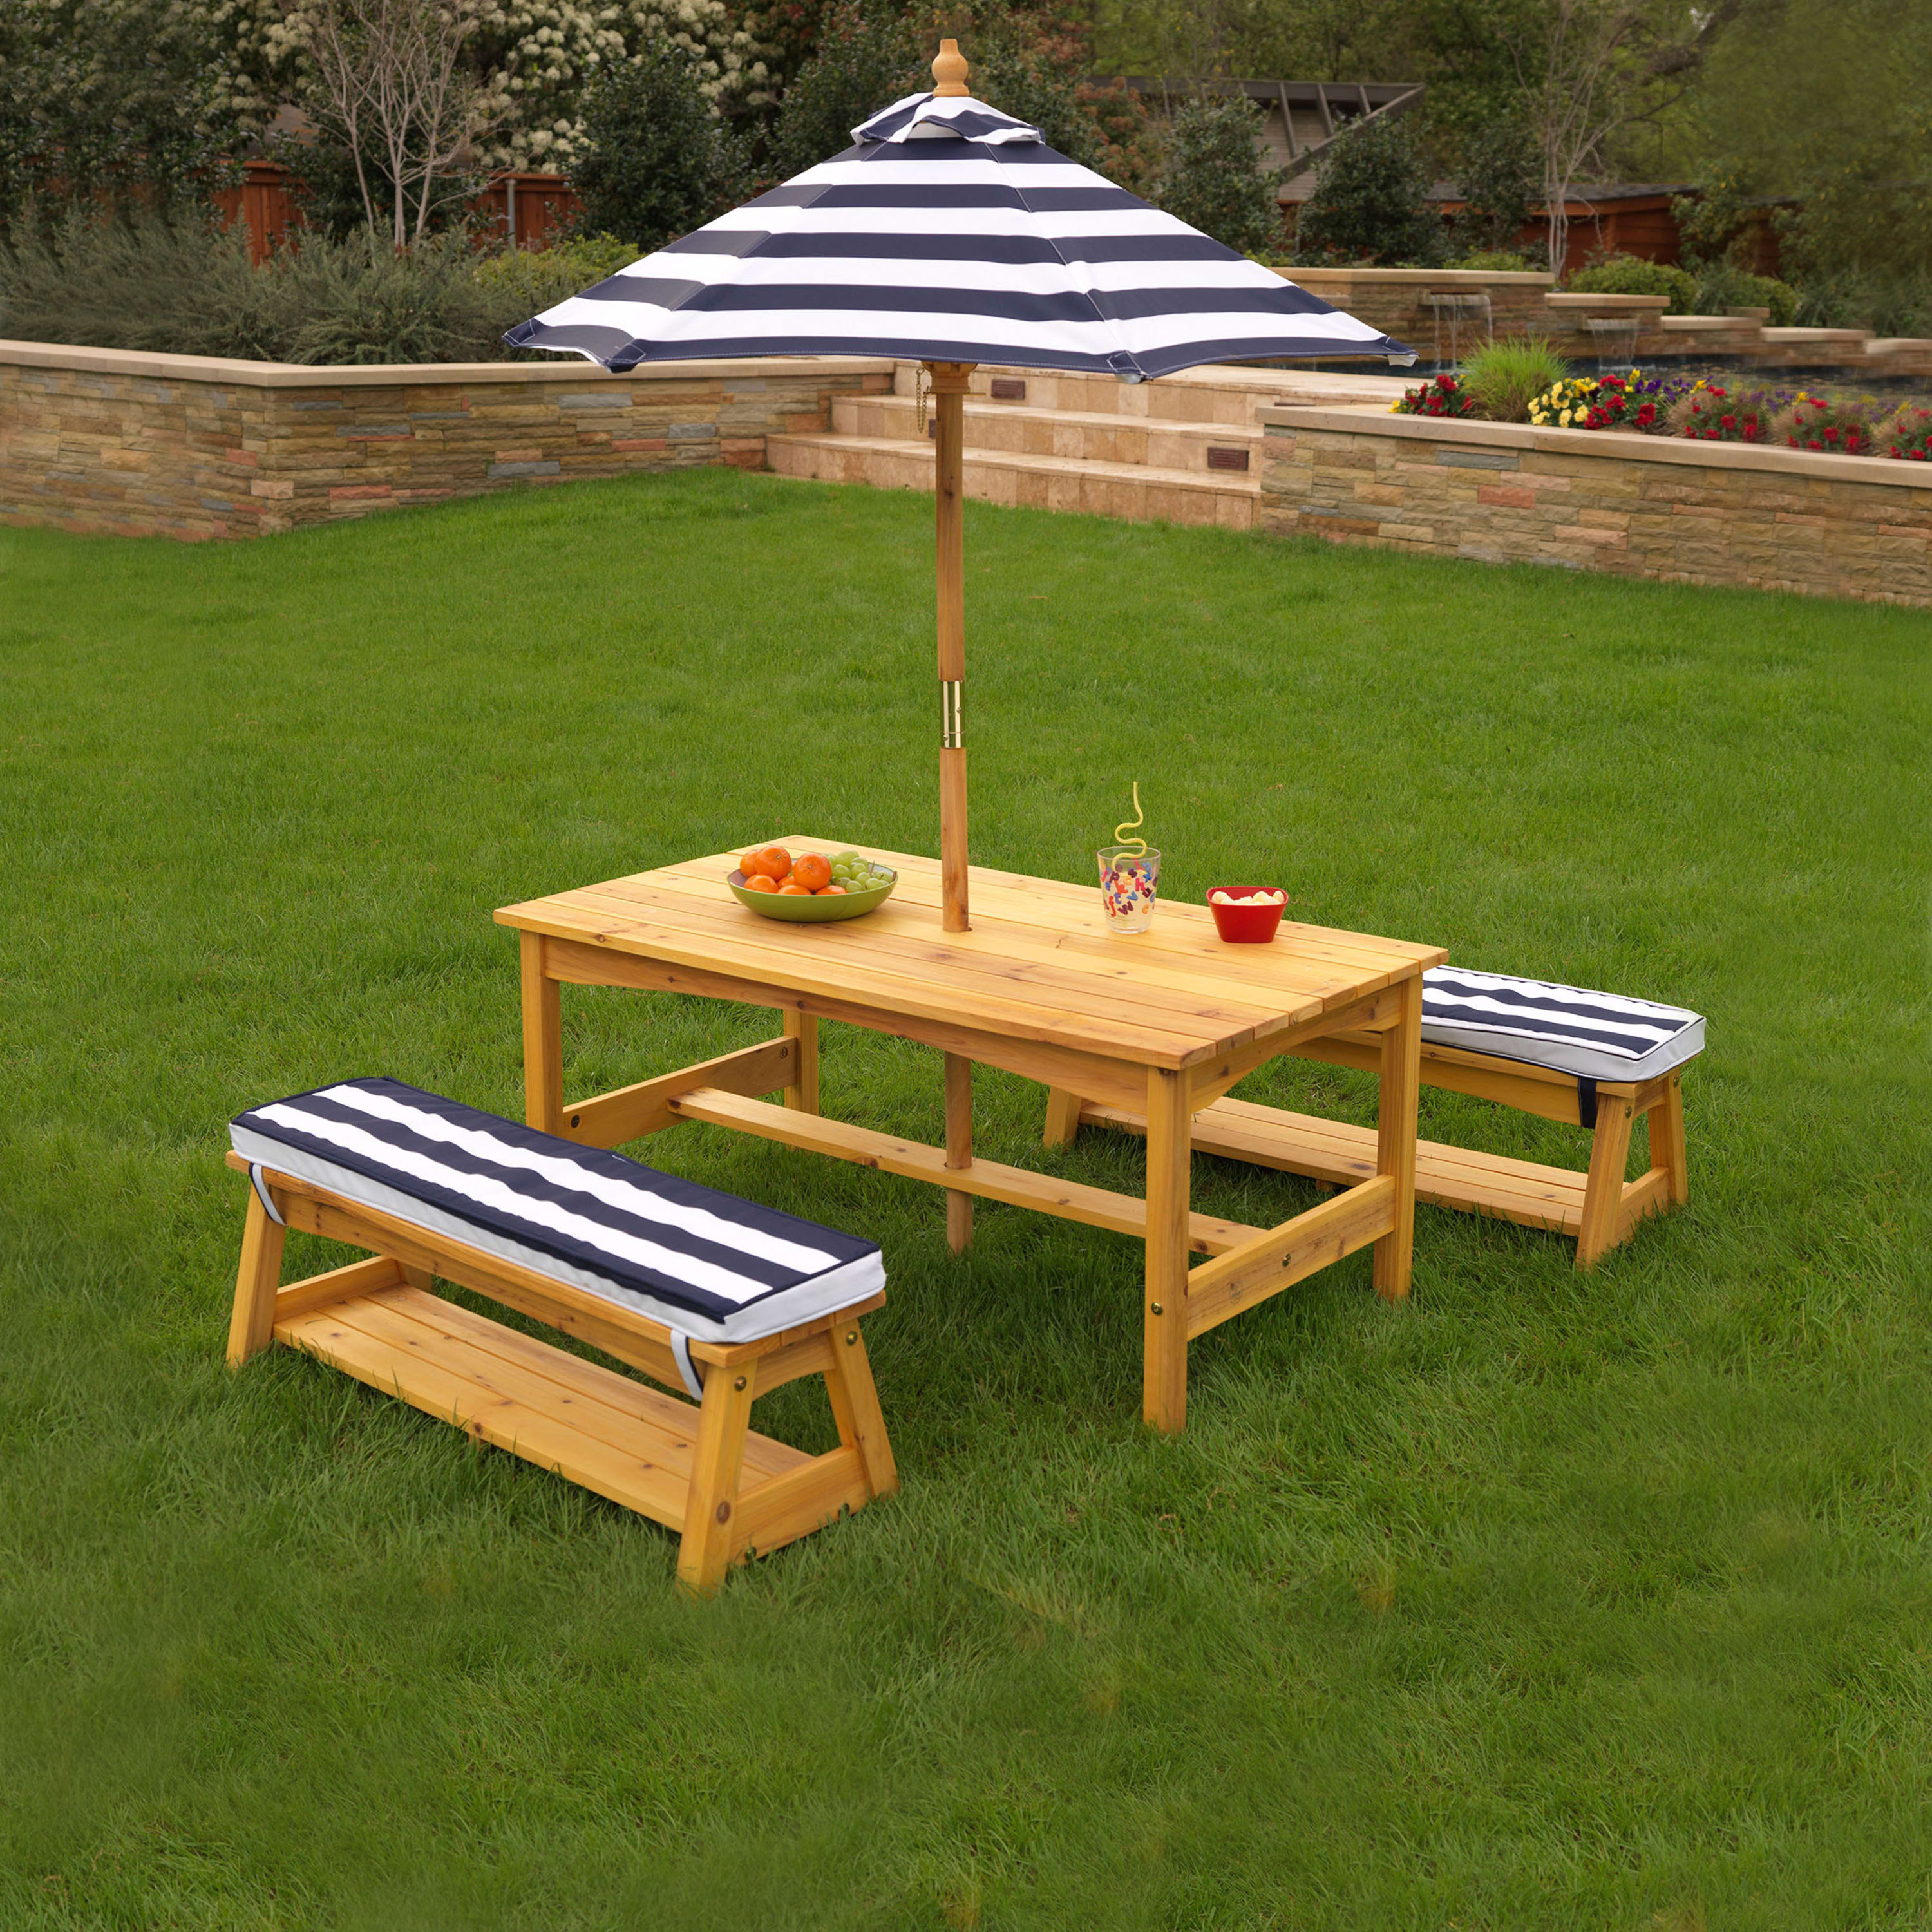 KidKraft Outdoor Wooden Table & Benches with Cushions & Umbrella, Navy